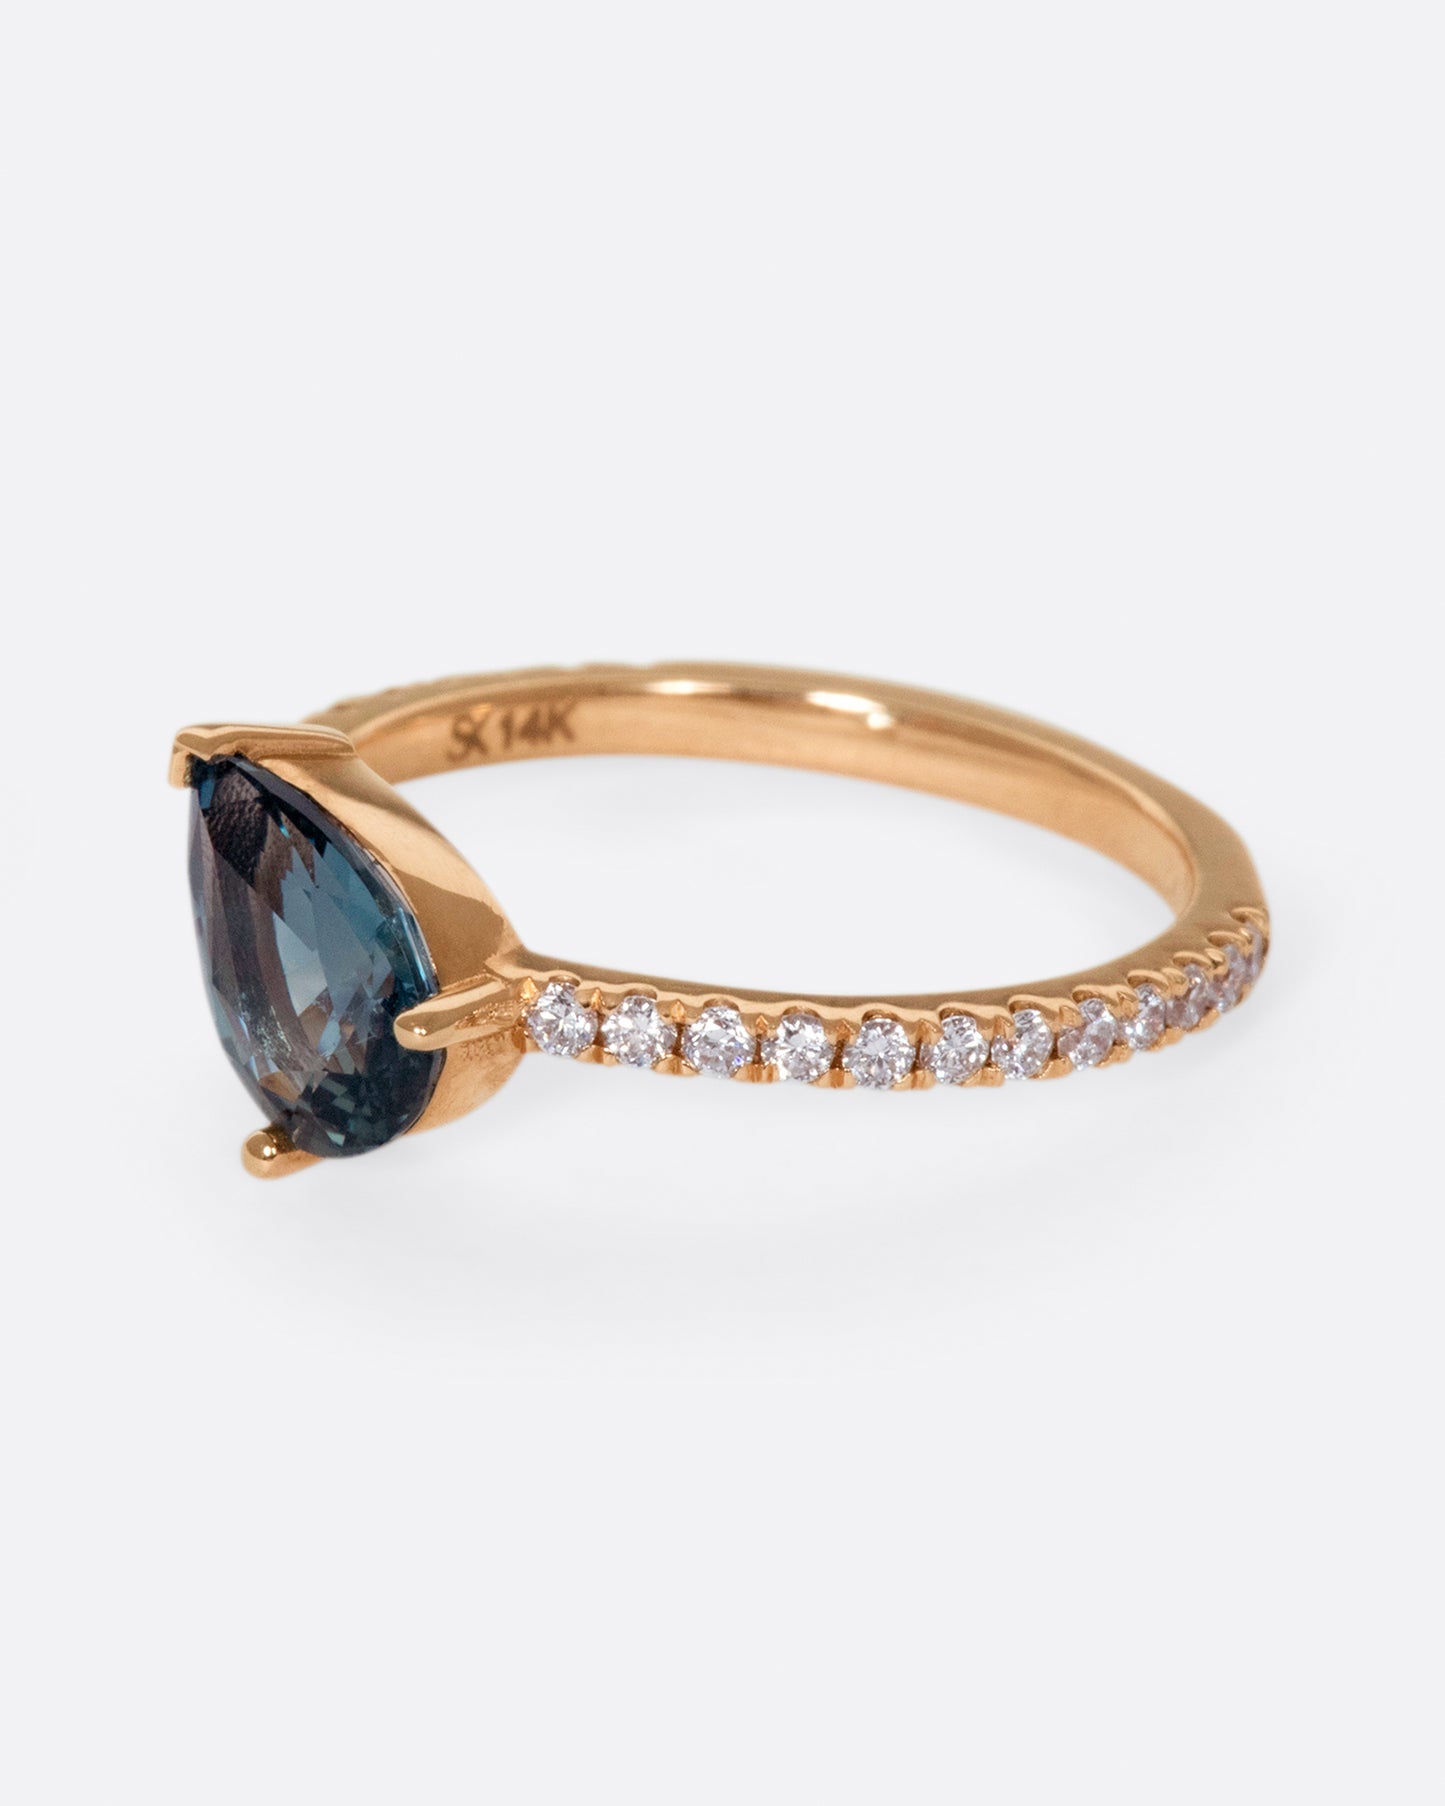 The saturated blue-green sapphire is the star of this ring.